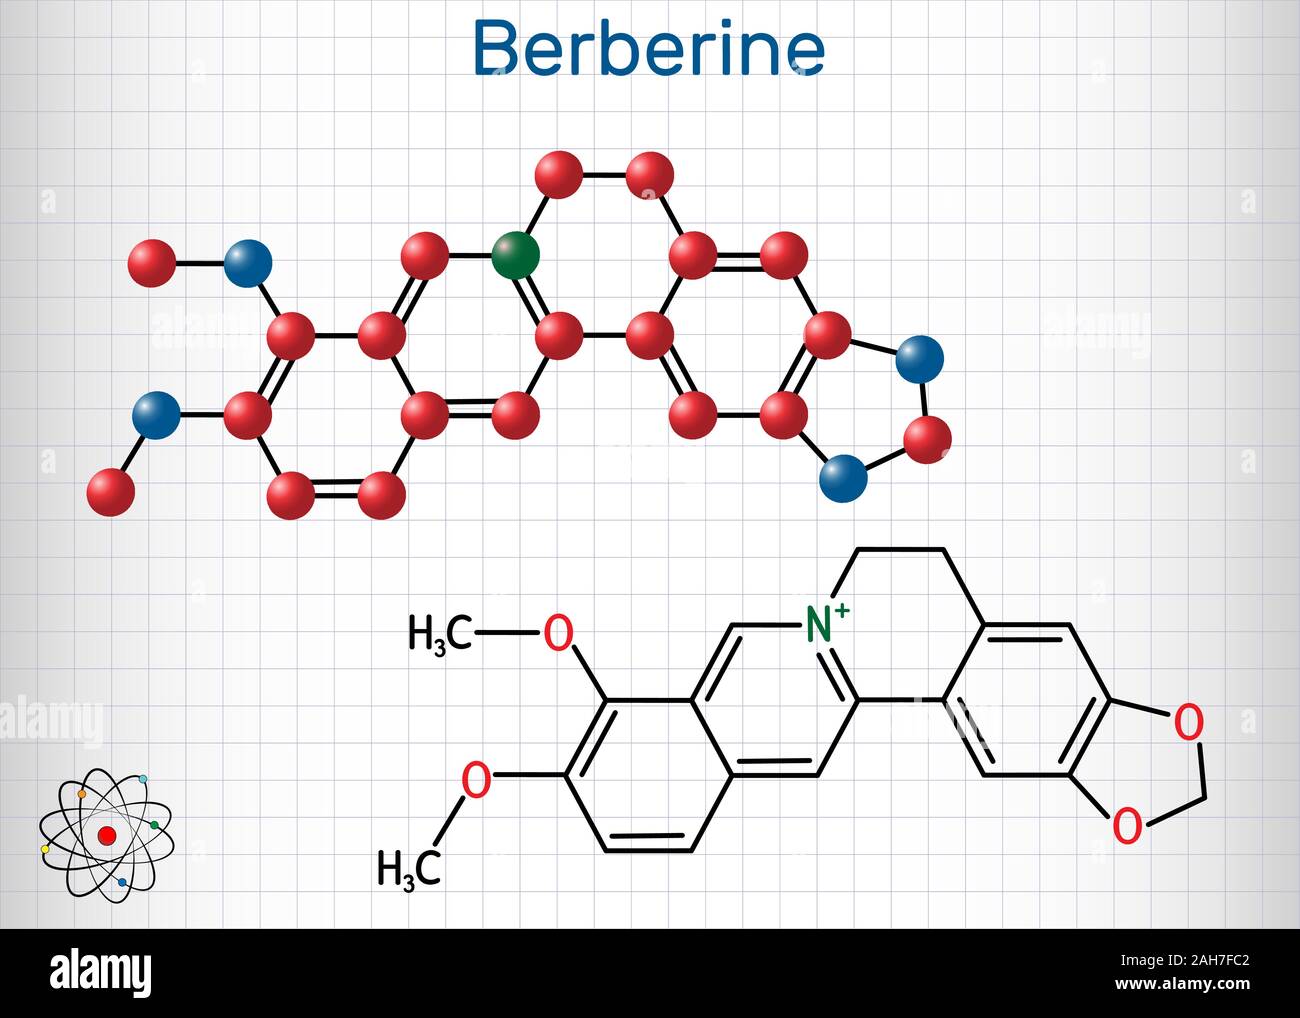 Berberine C20H18NO4, herbal alkaloid molecule. Structural chemical formula and molecule model. Sheet of paper in a cage. Vector illustration Stock Vector